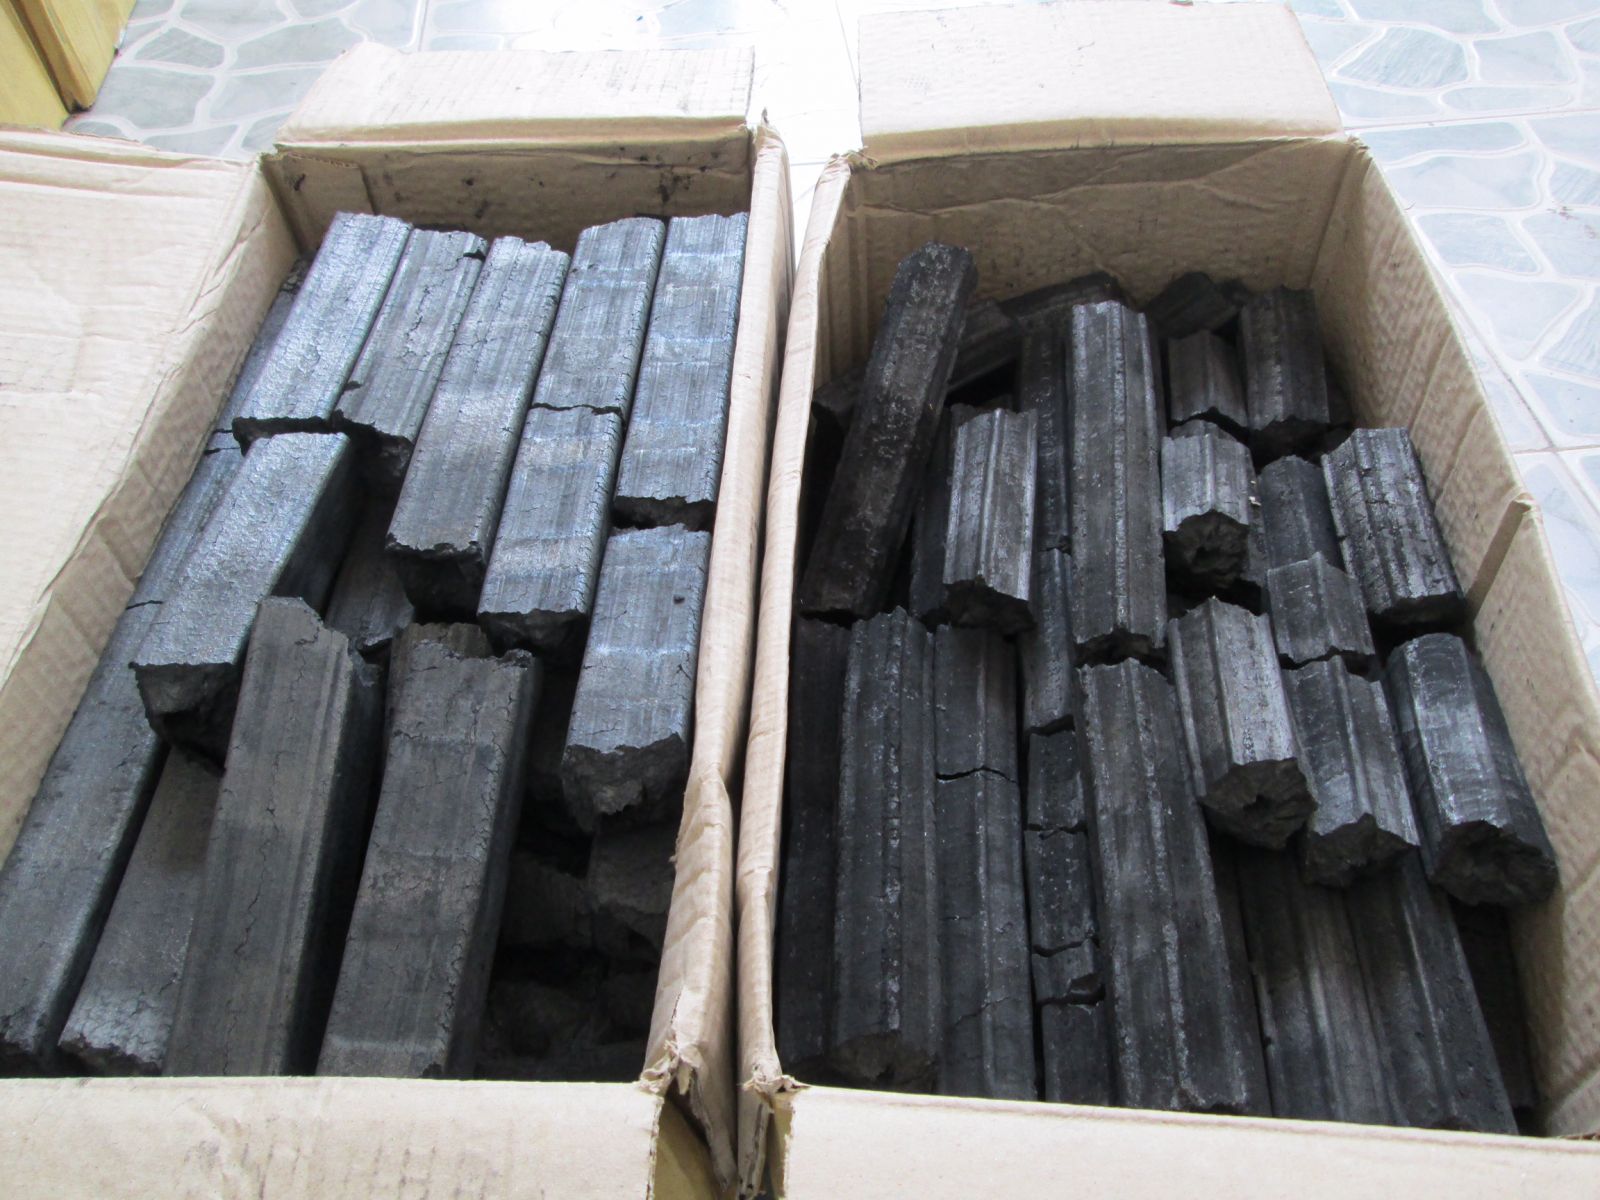 Sawdust charcoal express delivery services to the UAE